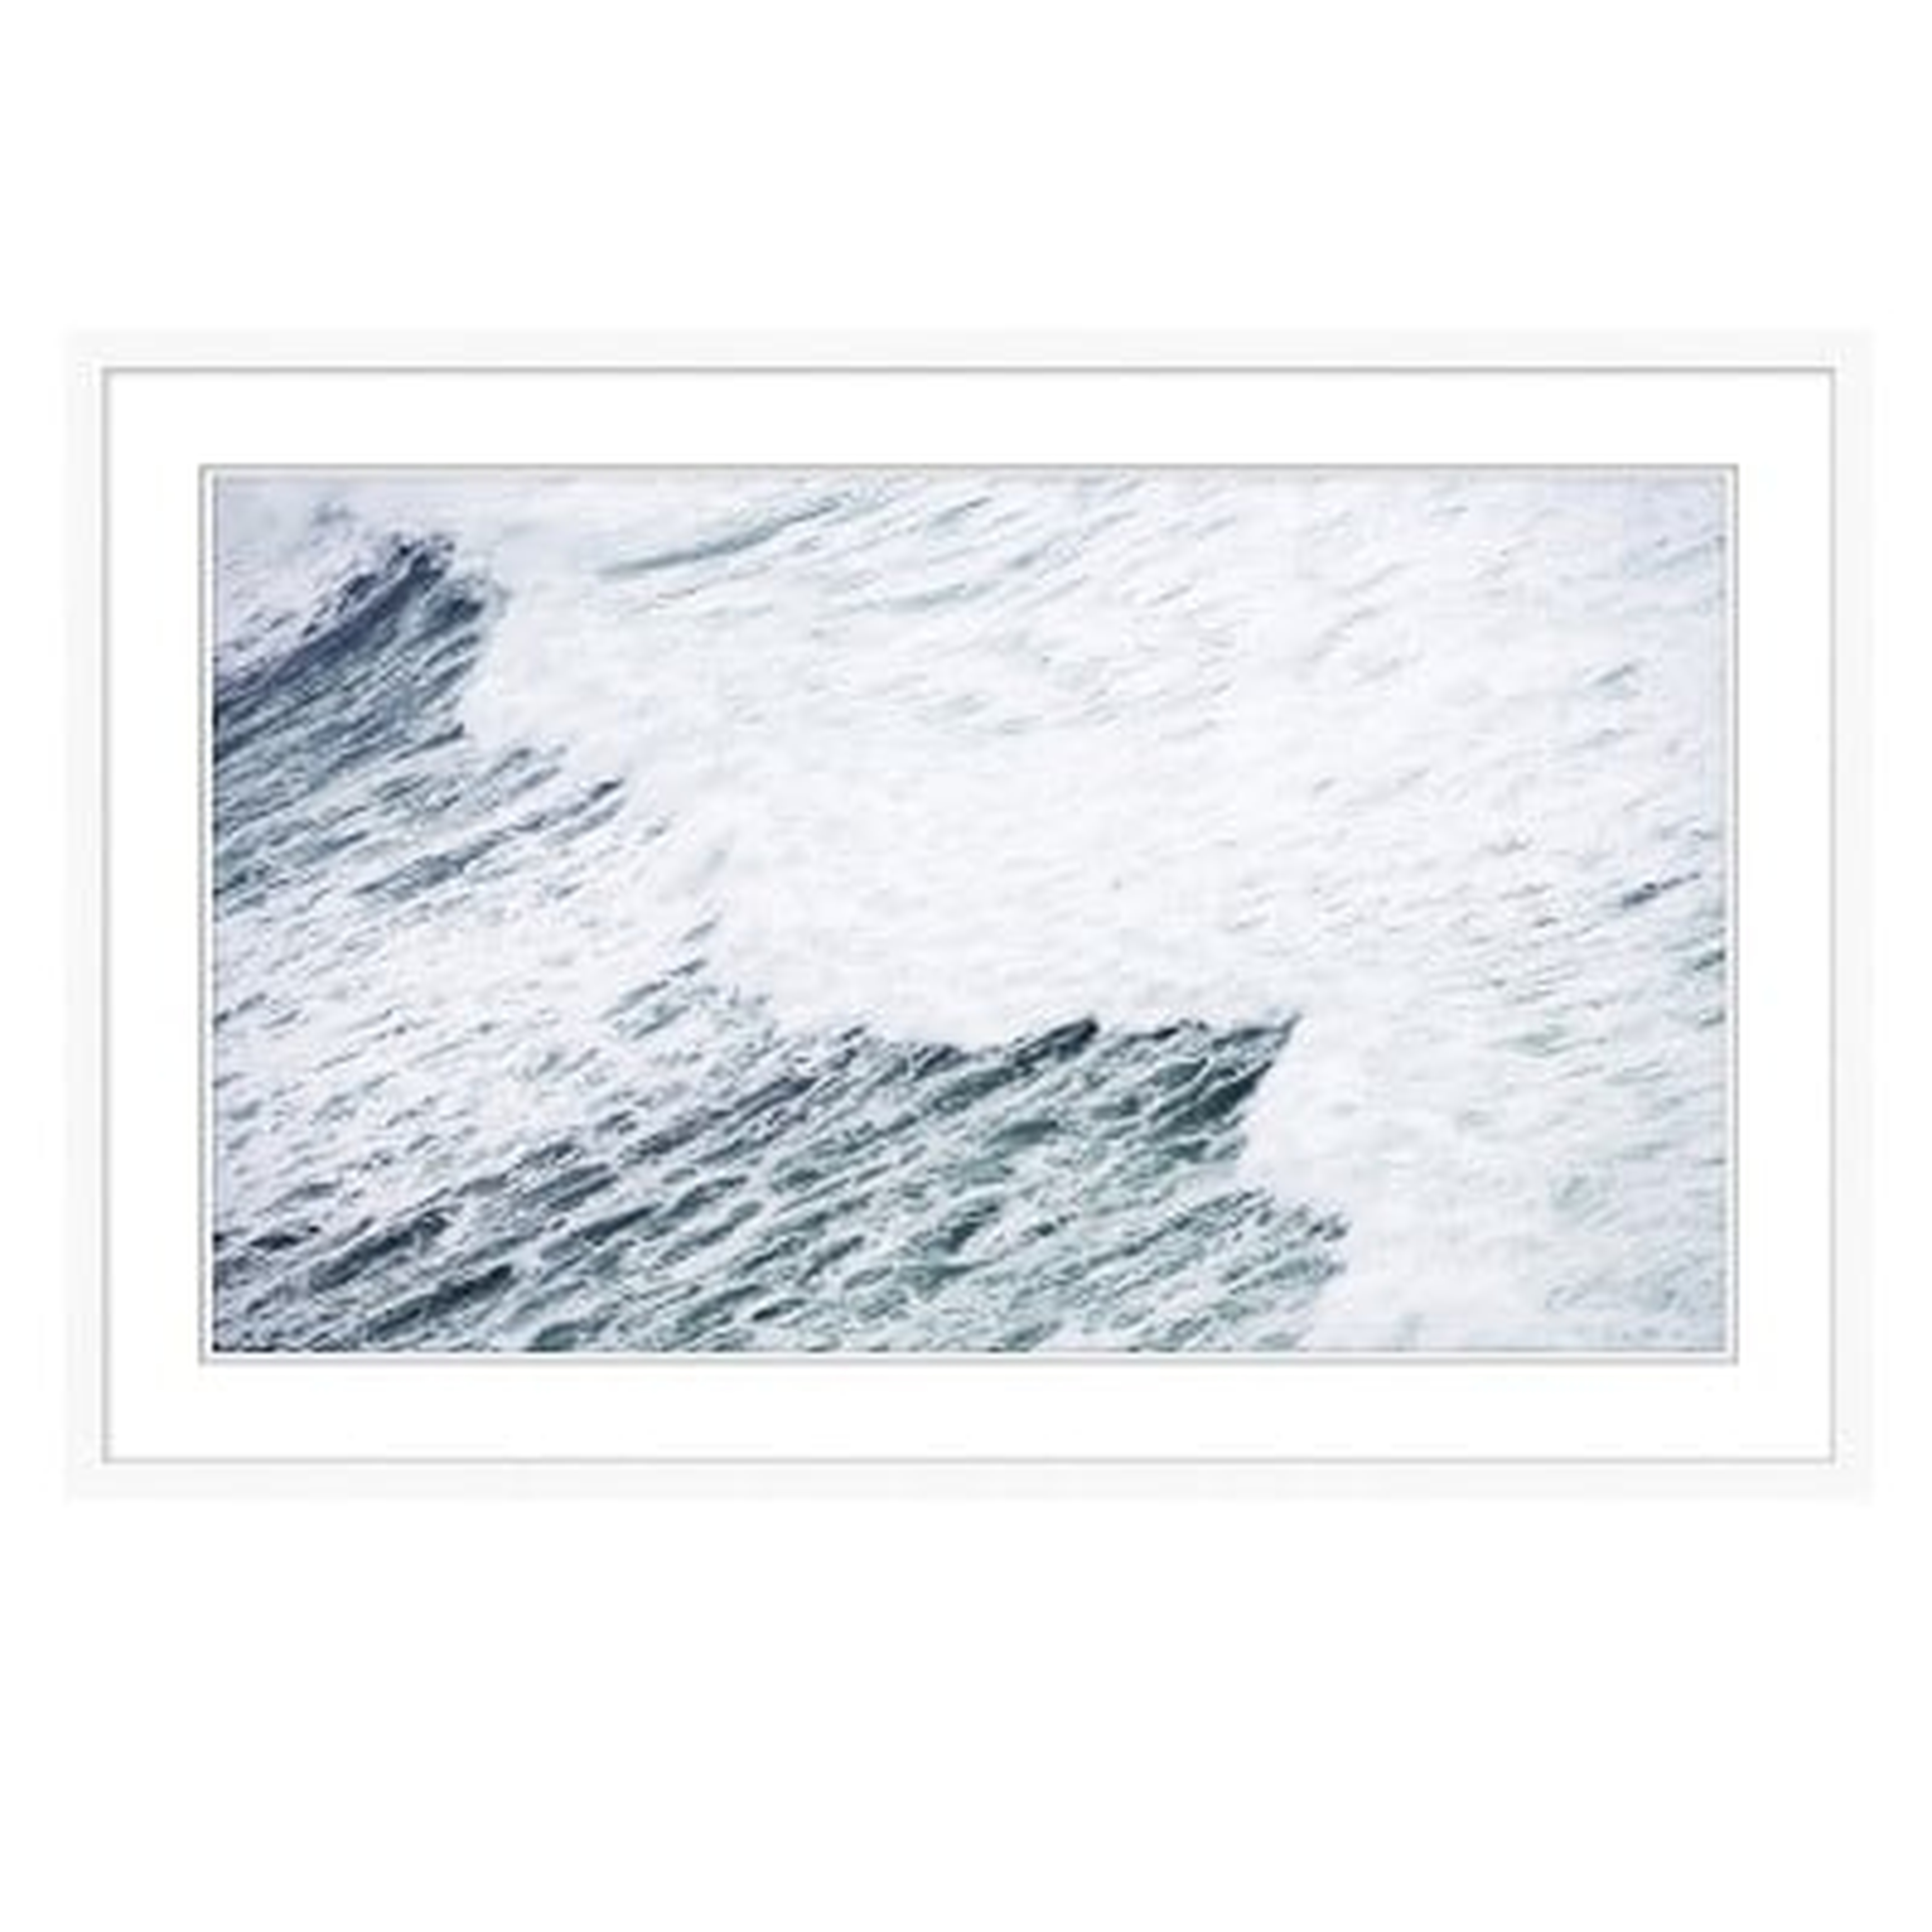 In The Waves - Williams Sonoma